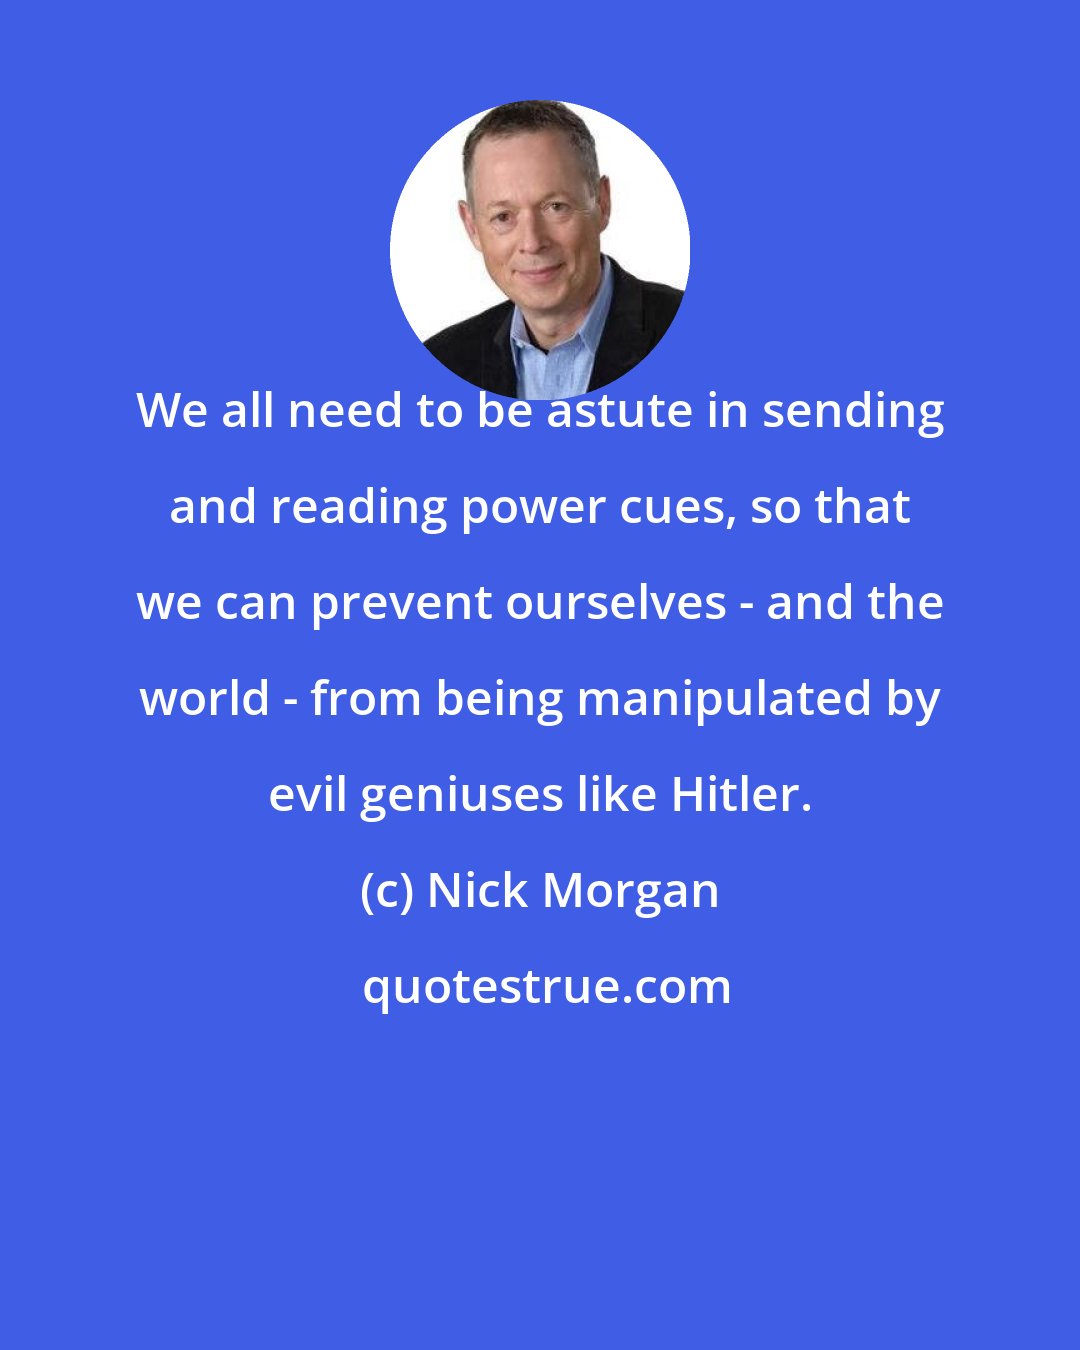 Nick Morgan: We all need to be astute in sending and reading power cues, so that we can prevent ourselves - and the world - from being manipulated by evil geniuses like Hitler.